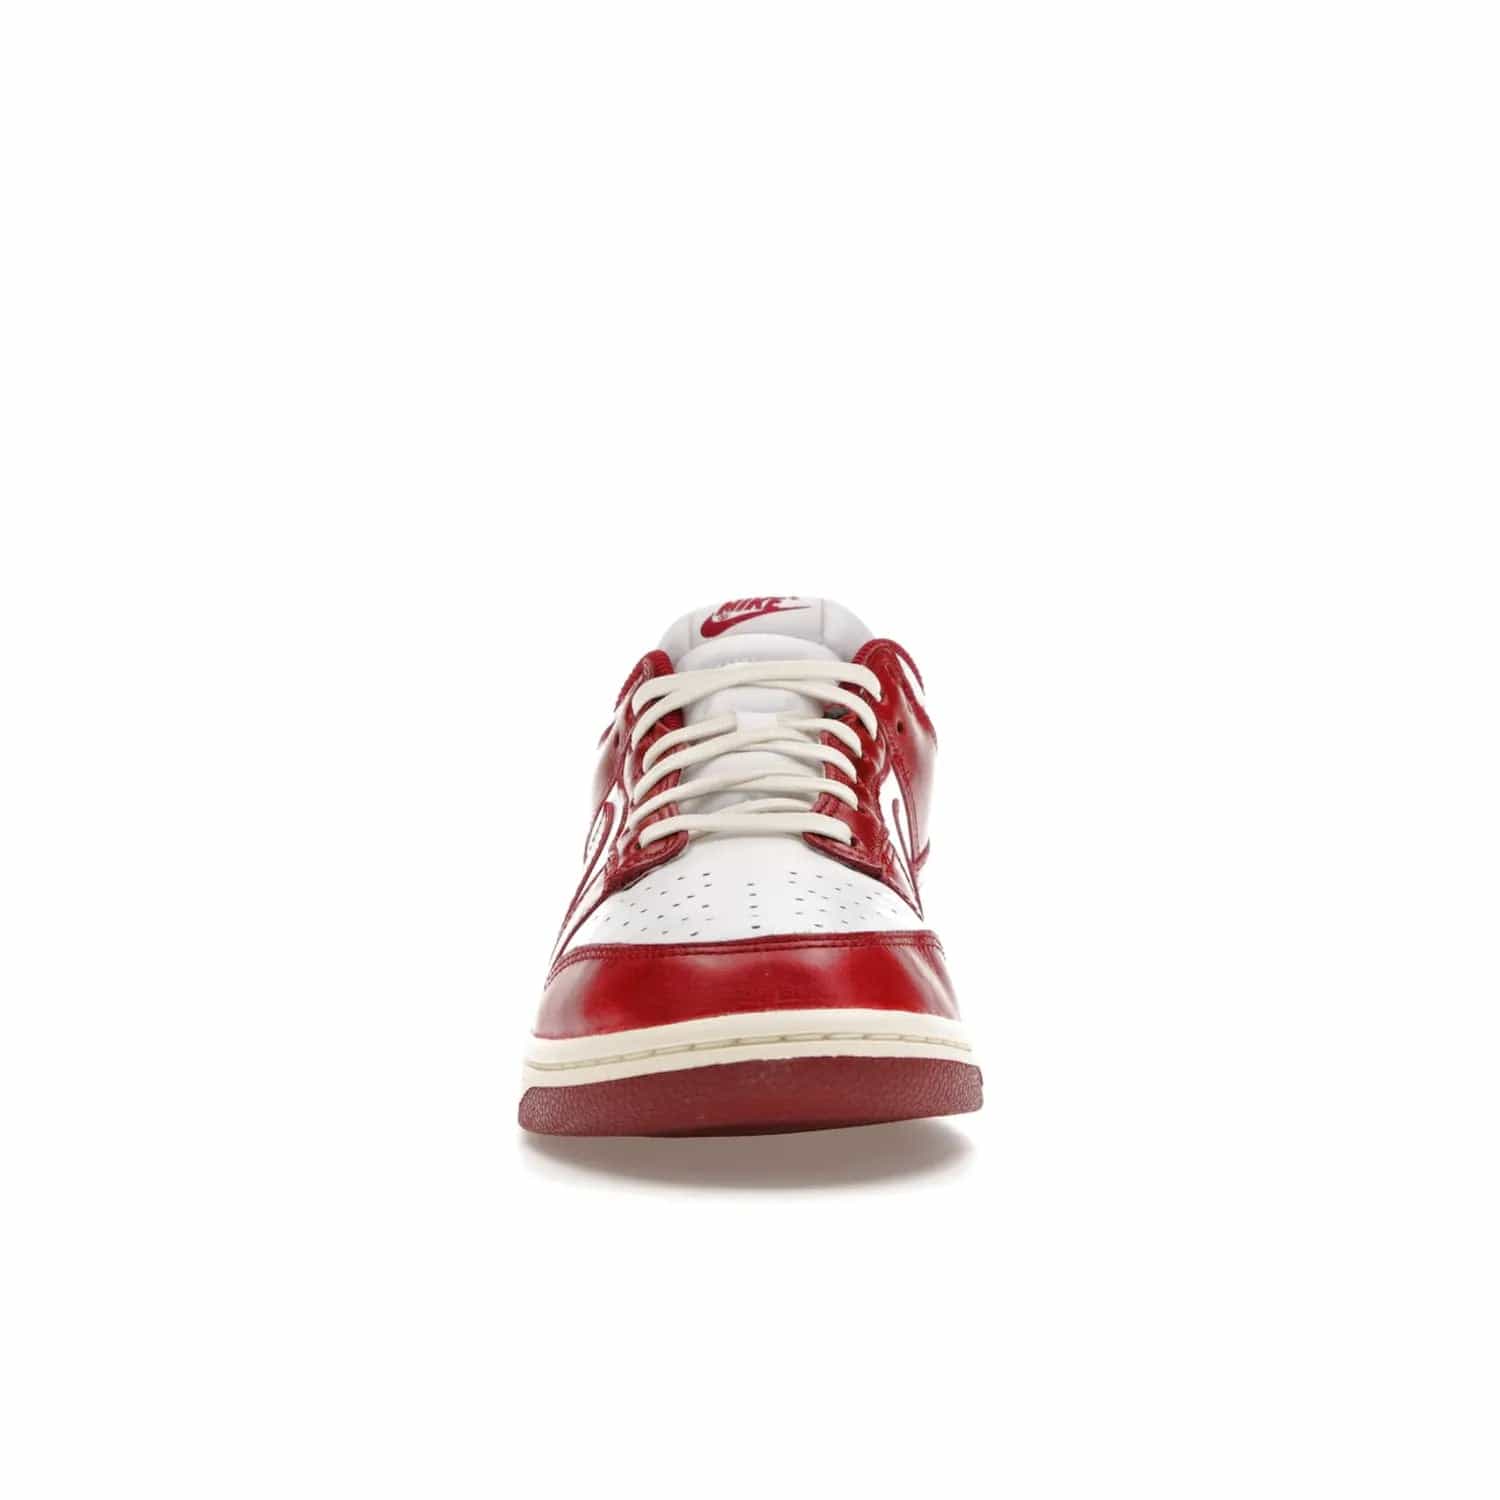 Nike Dunk Low PRM Vintage Team Red (Women's) - Image 10 - Only at www.BallersClubKickz.com - Shop the stylish Nike Dunk Low PRM Vintage Team Red. Signature Red and White leather with Coconut Milk midsoles for an aged finish. 21 April 2023 release.